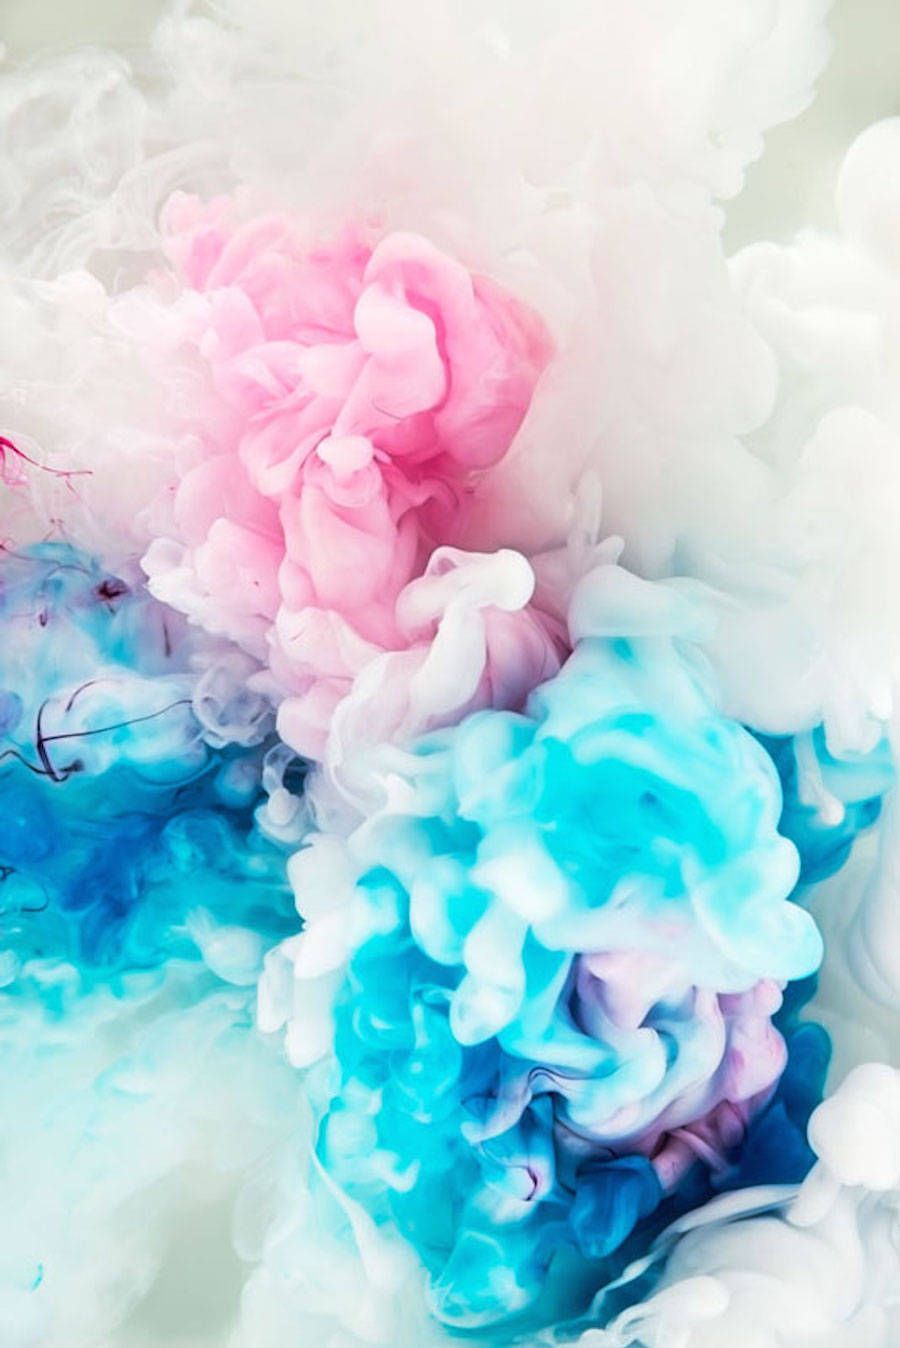 Aesthetic Colored Abstract Ink Explosions Wallpaper.jpg